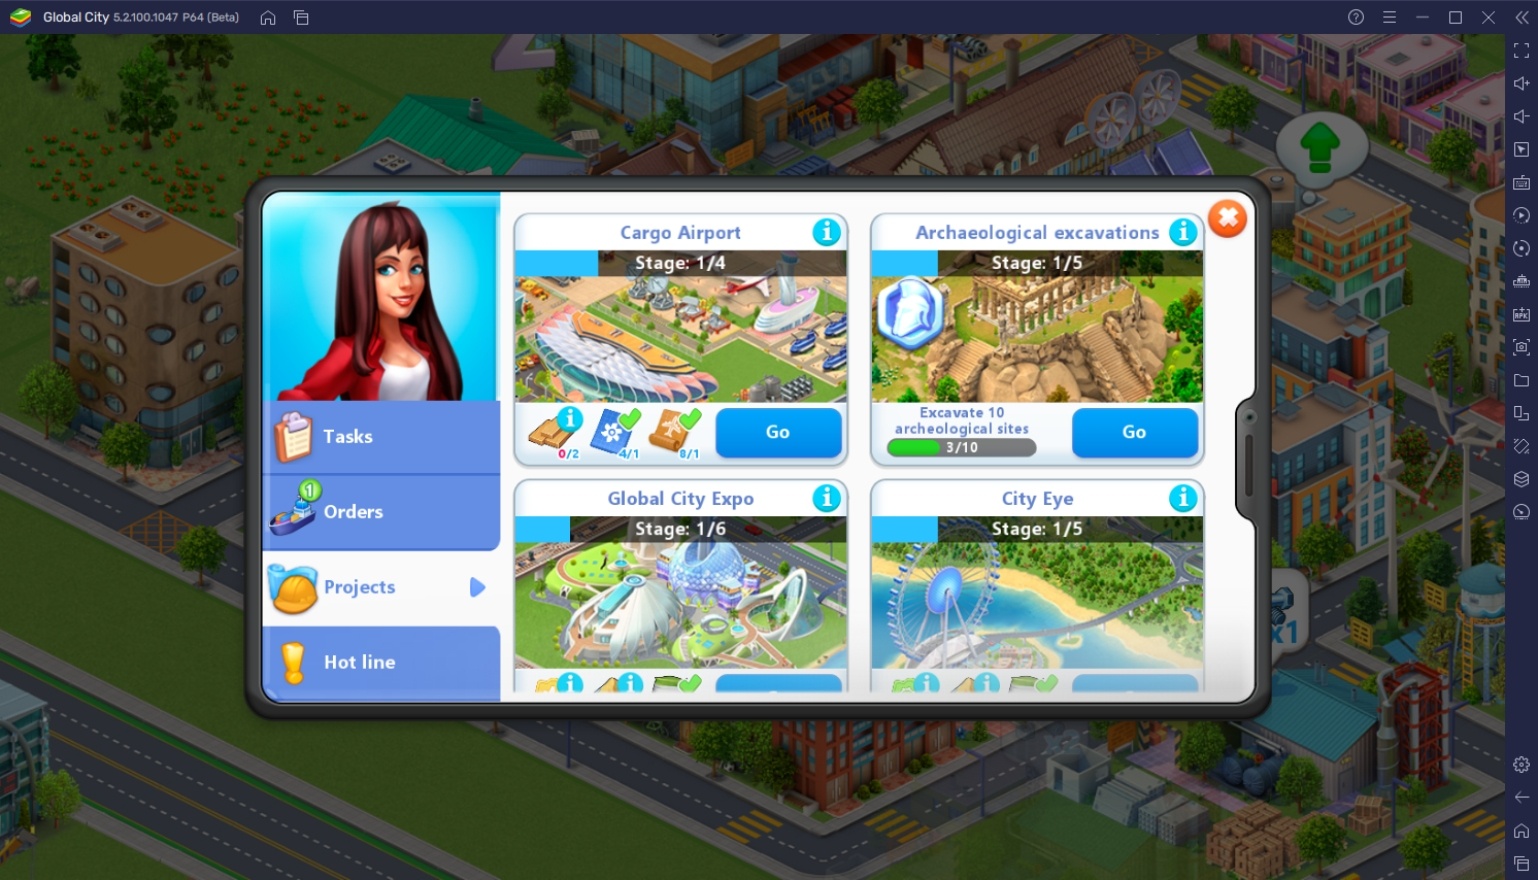 Tips & Tricks to Playing Global City: Build and Harvest